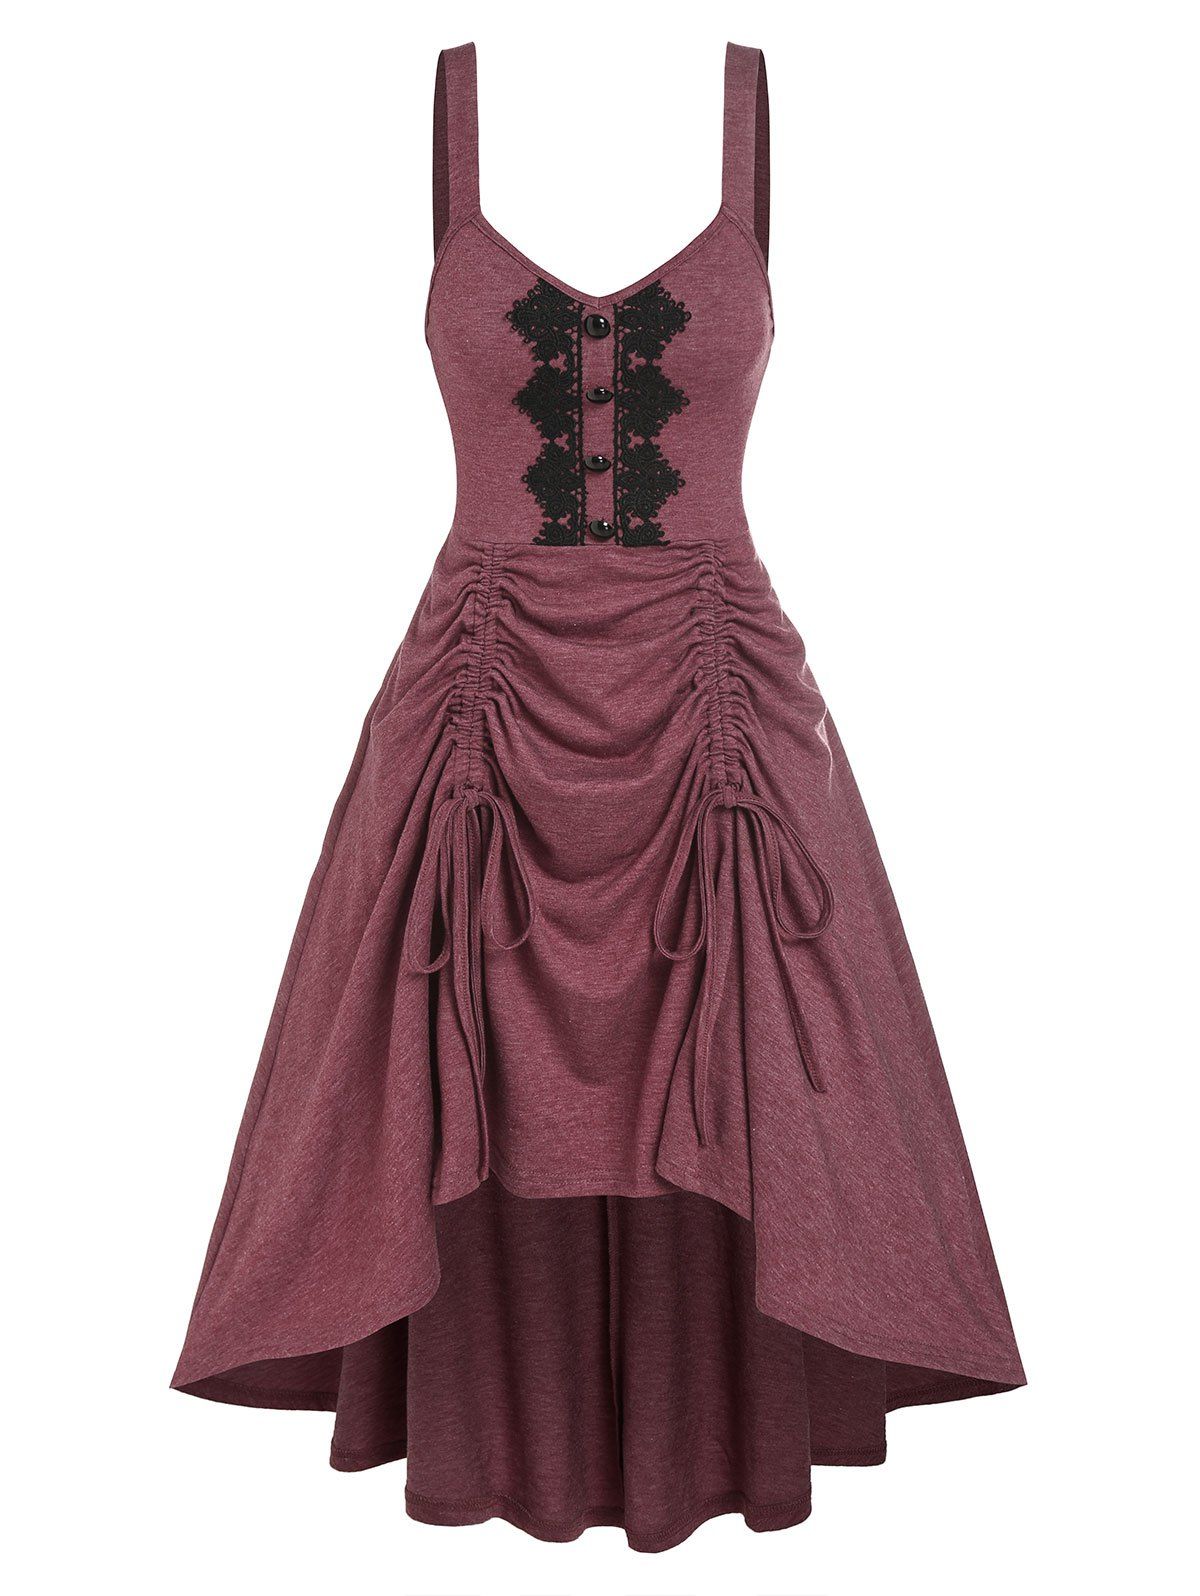 Sleeveless Lace Panel Cinched High Low Dress - DEEP RED L